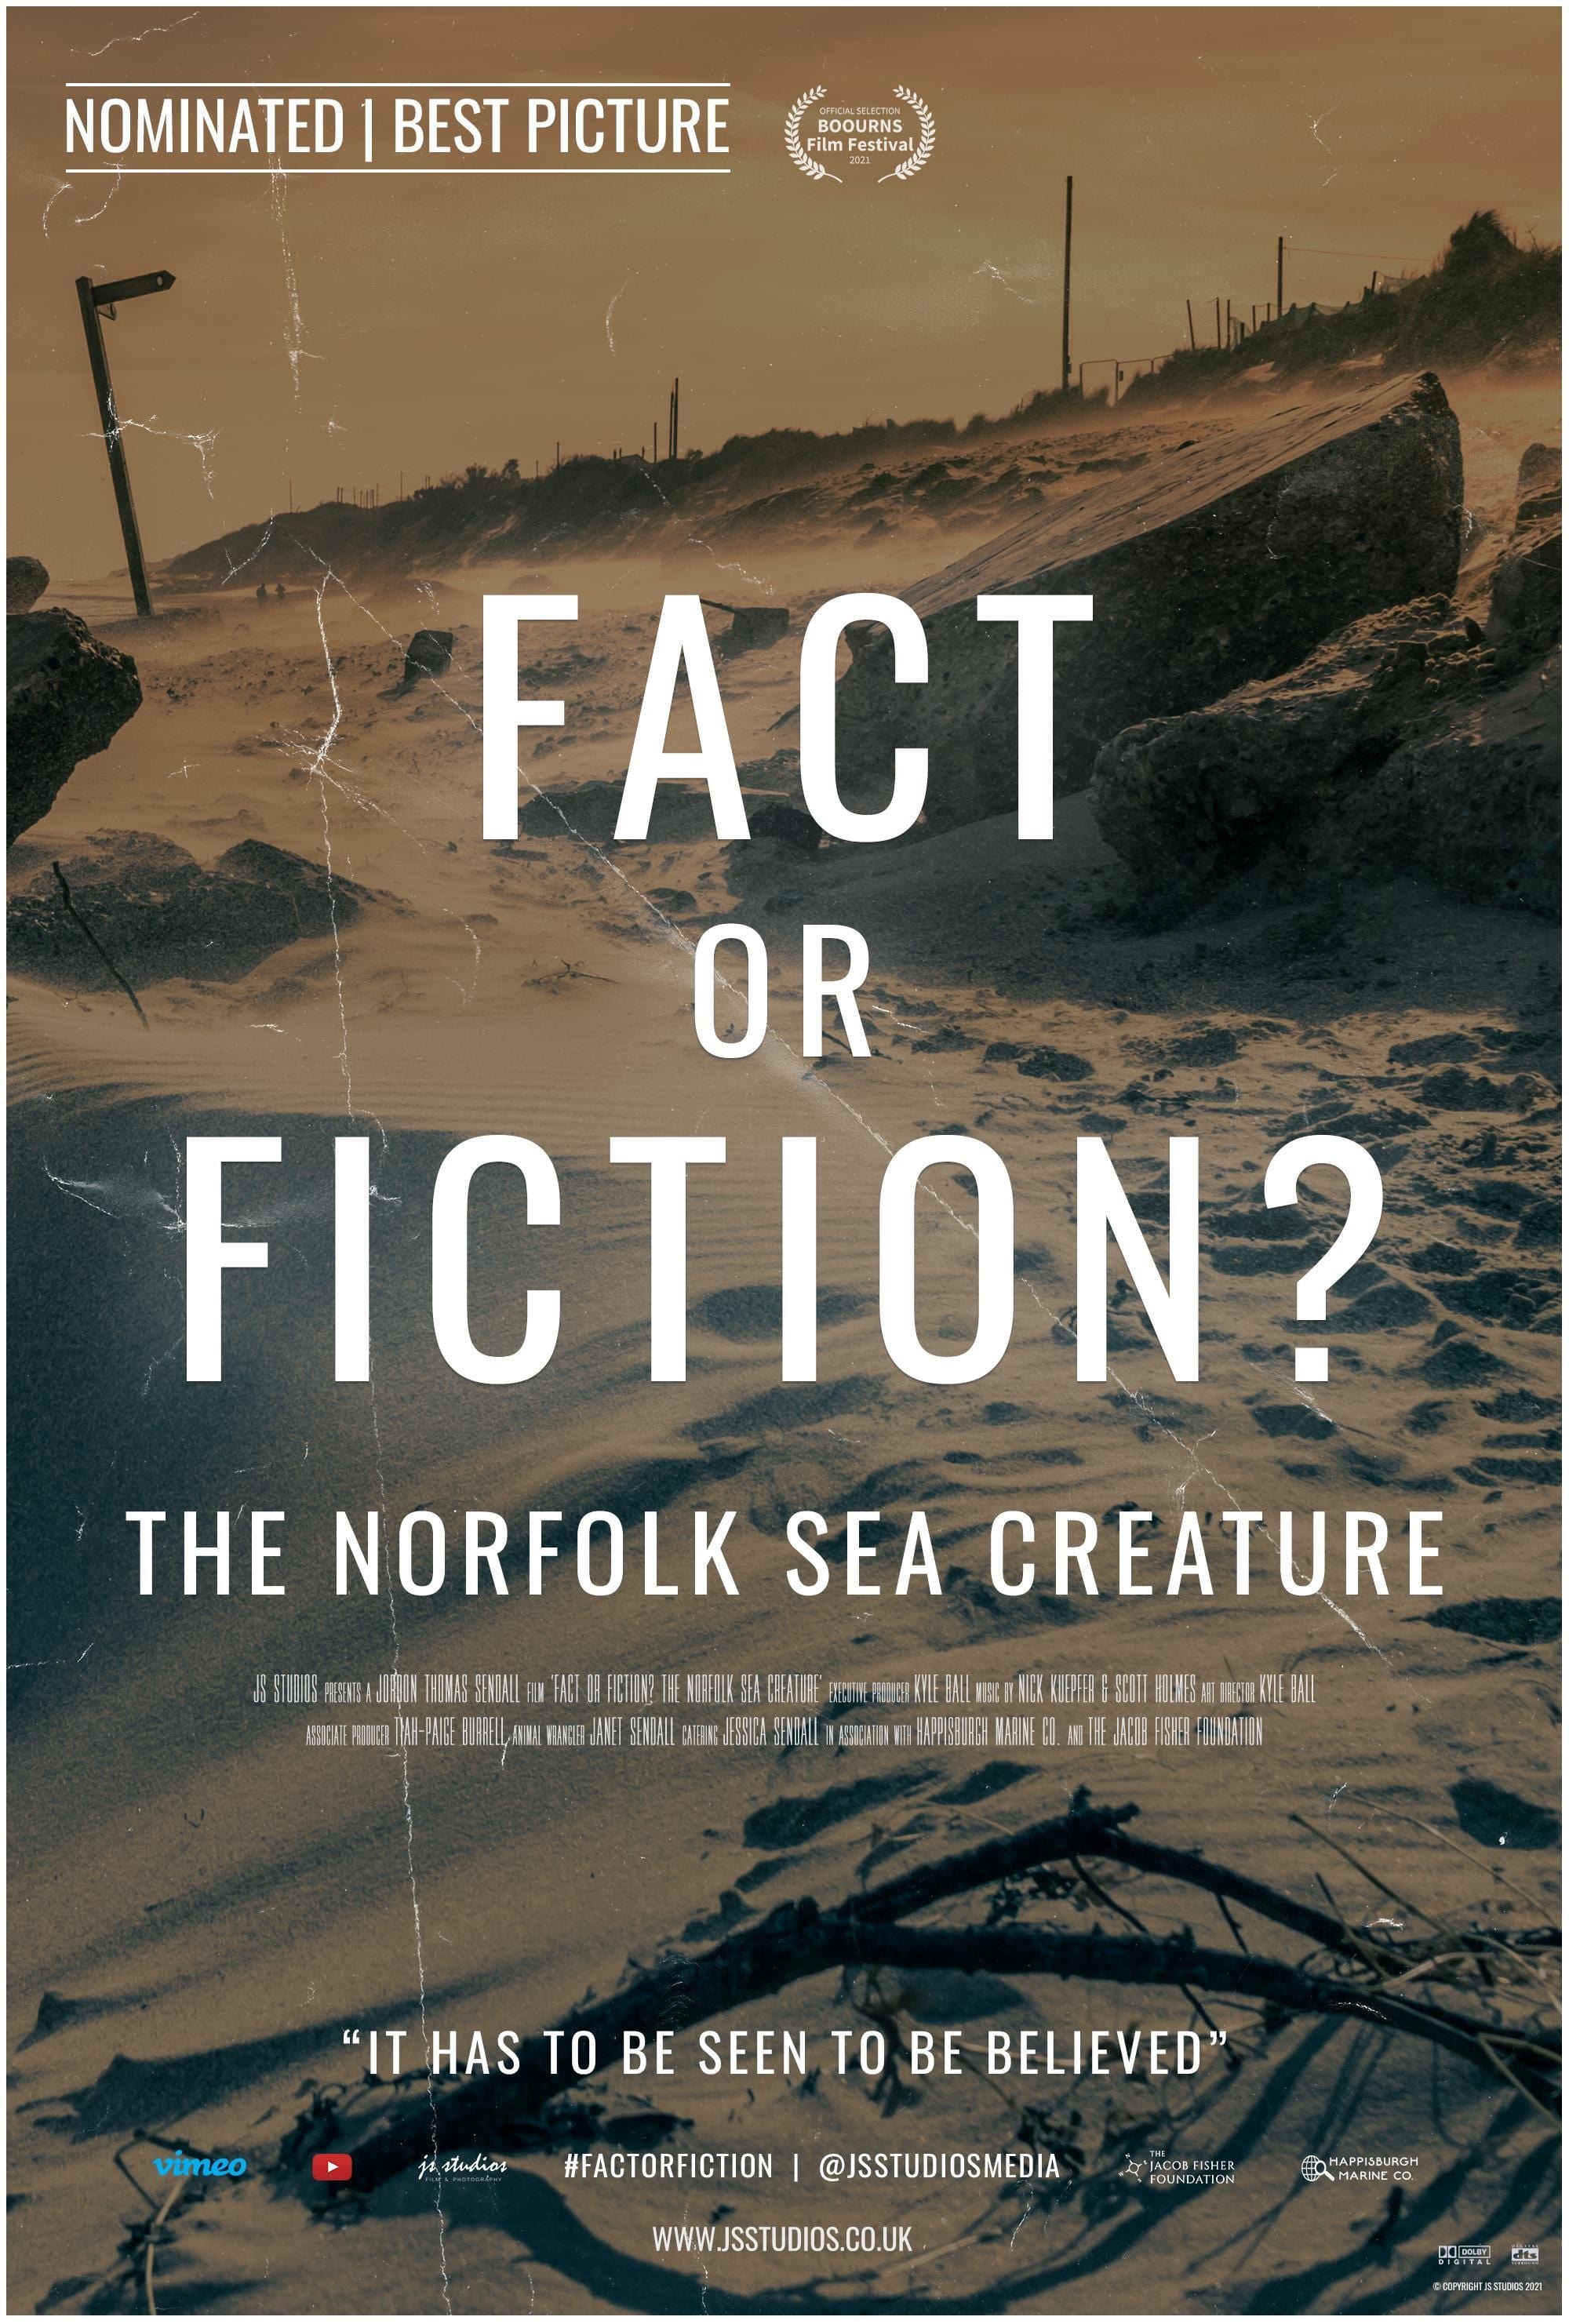 Fact or Fiction? The Norfolk Sea Creature